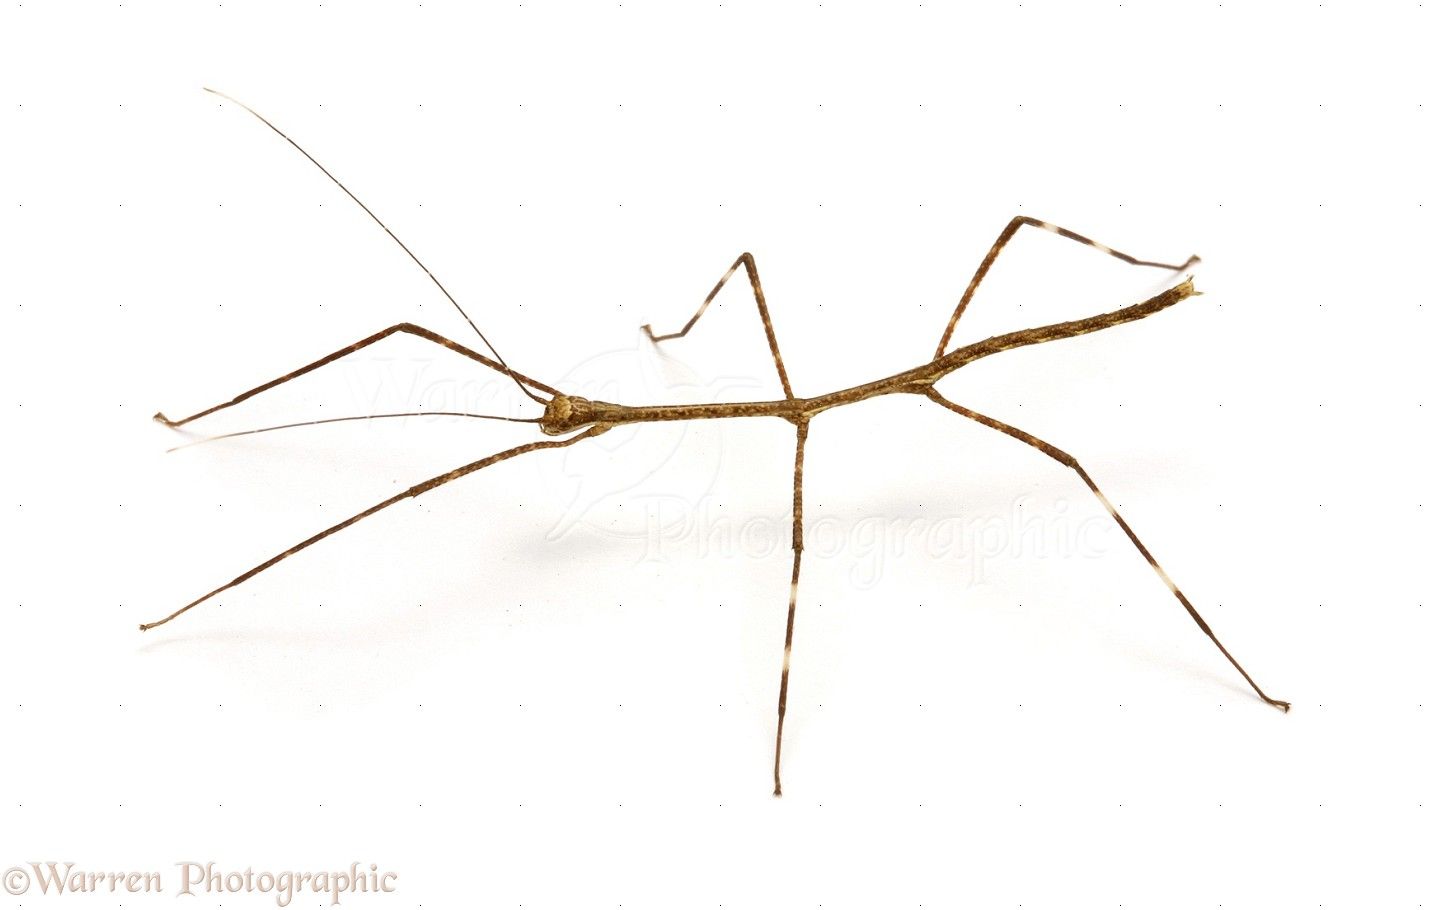 Top Animal Photo: Stick Insect photo